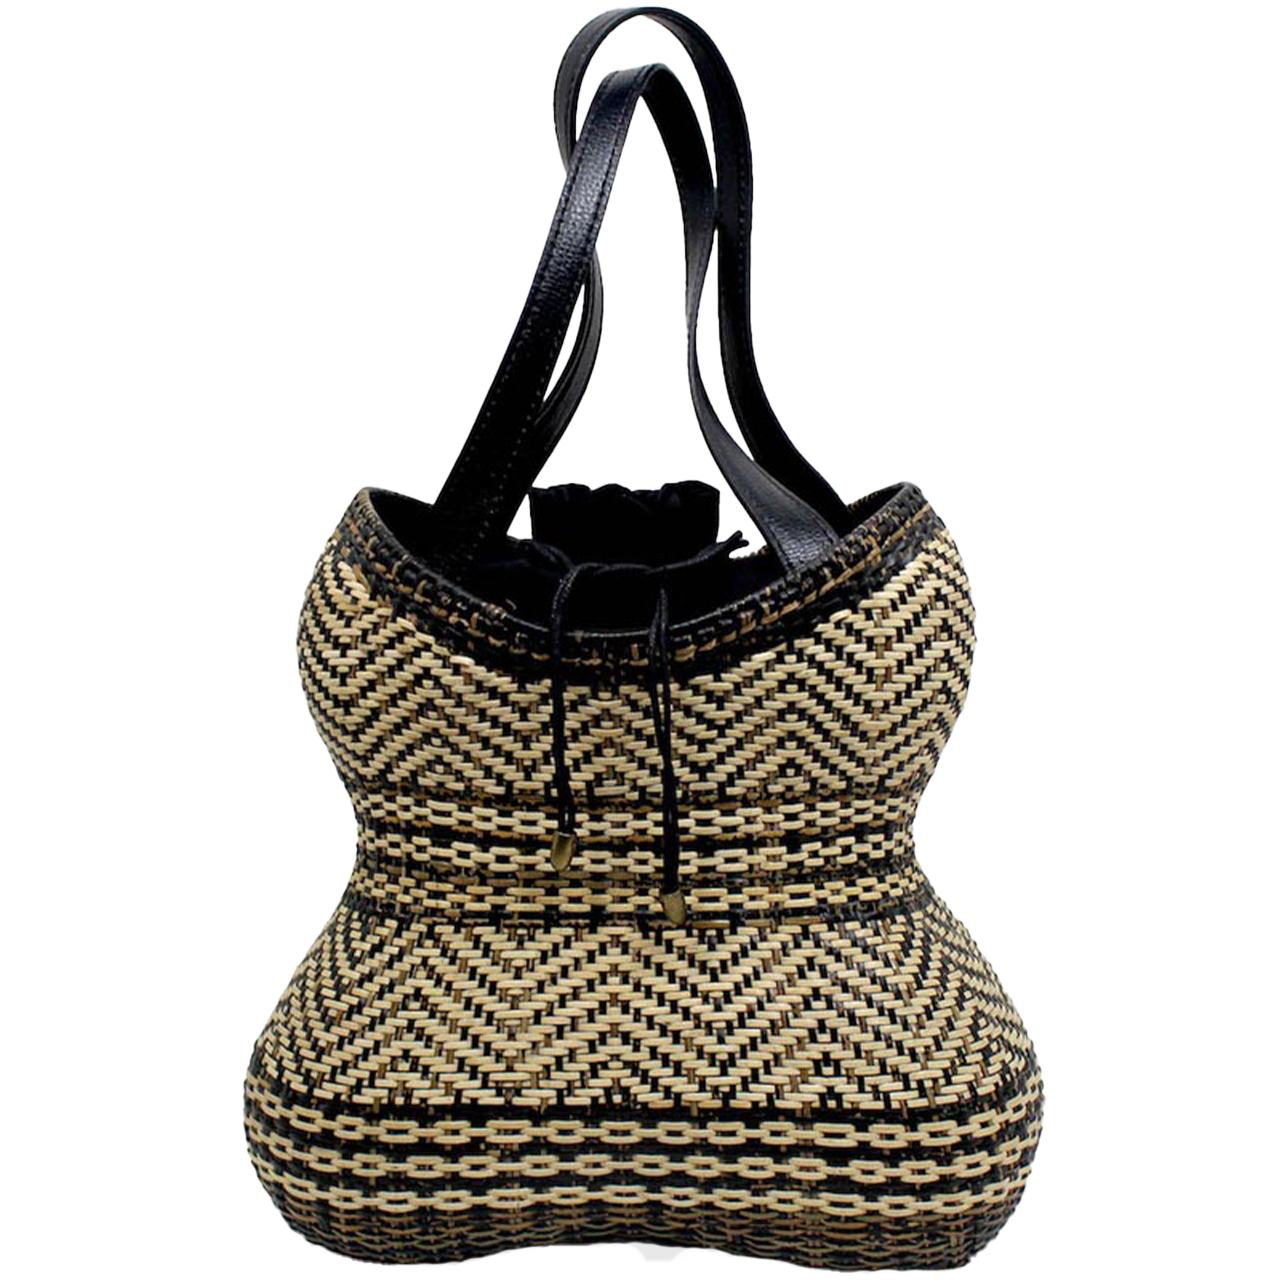 11 Woven and Straw Bags You Can Take From The Beach to The City | Shopping